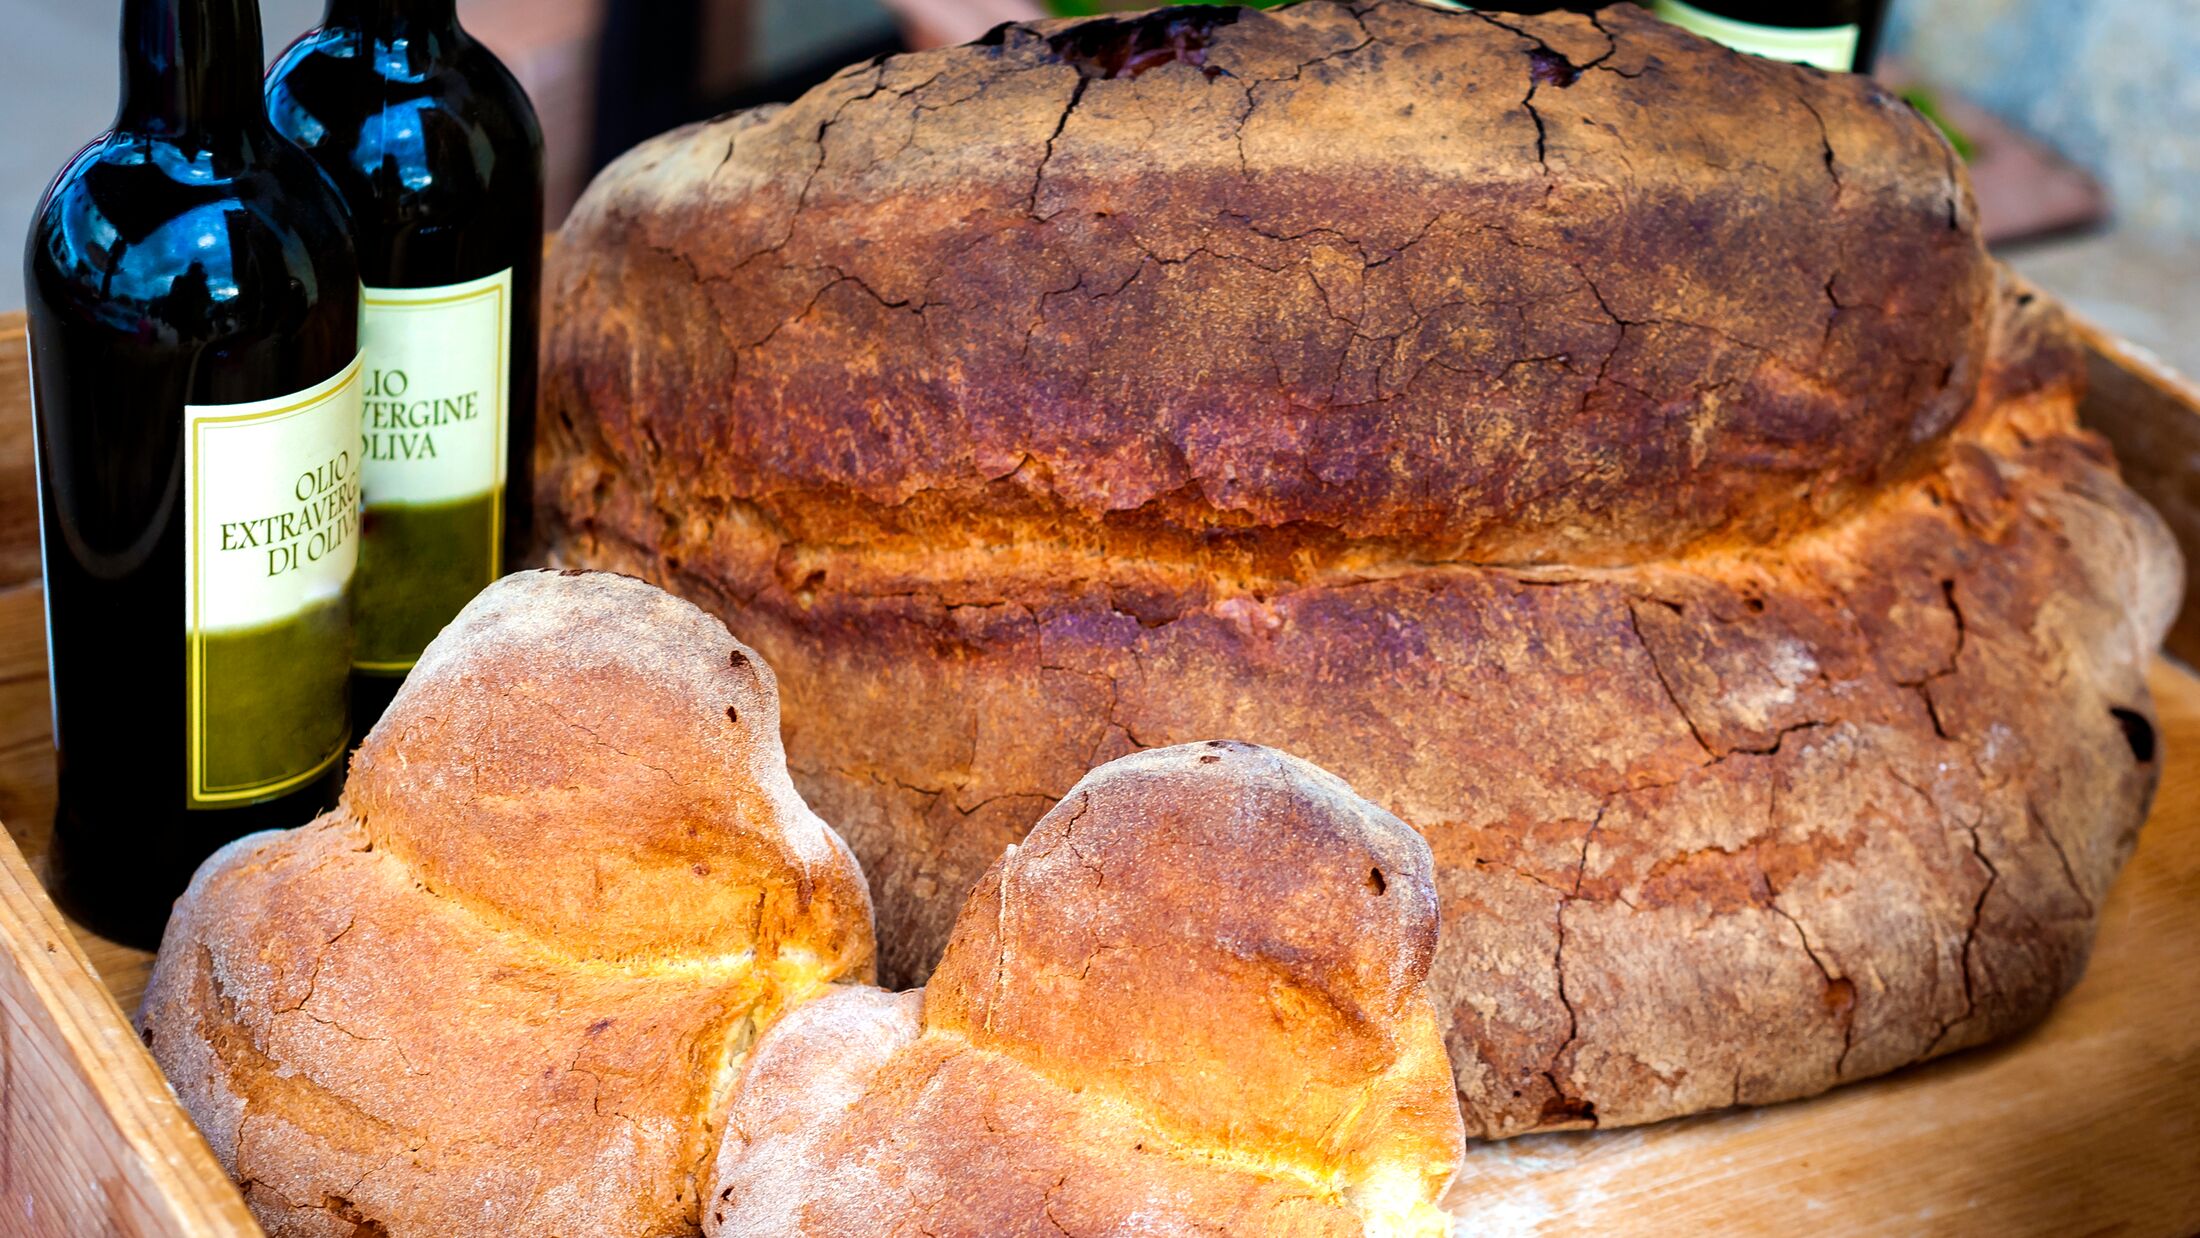 Display of Matera bread of different sizes, bottles with the indication of "Extra-virgin olive oil".